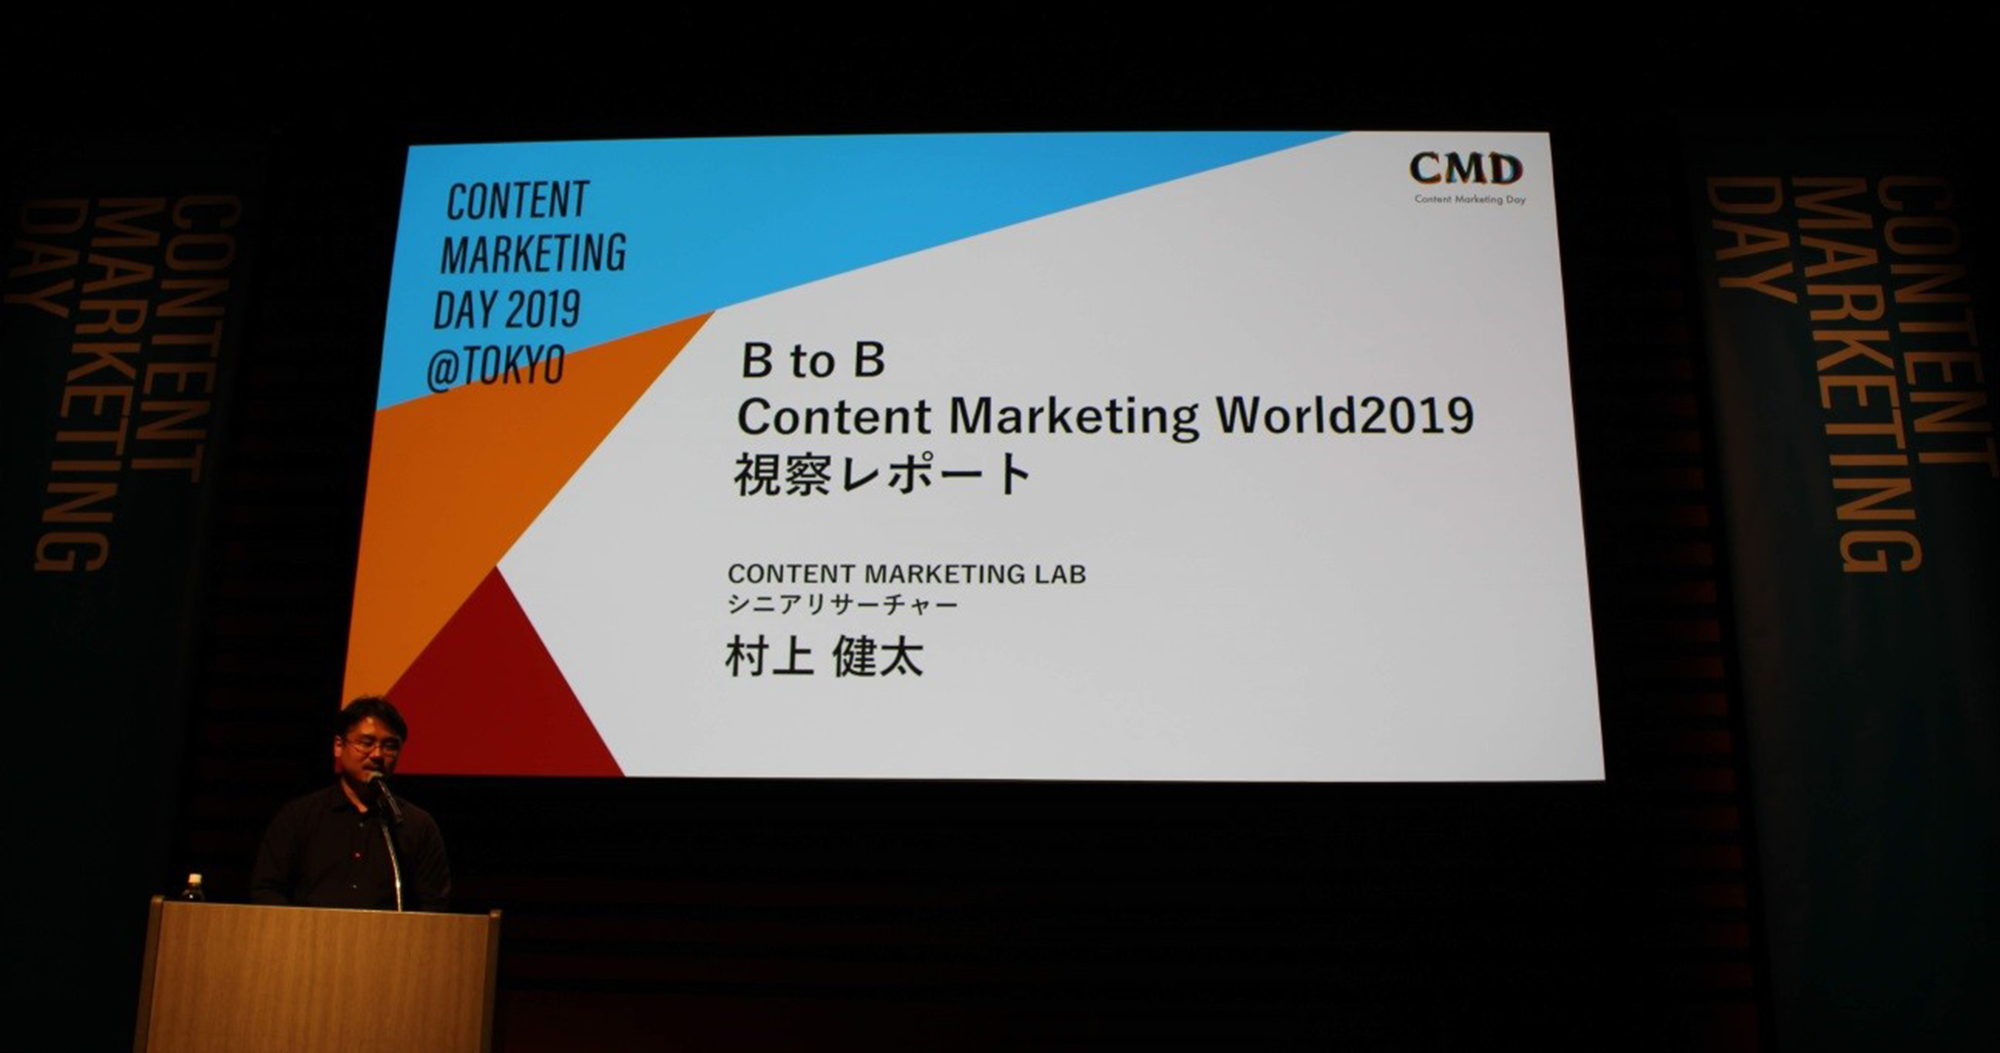 「CONTENT MARKETING DAY 2019」レポート　第七回「BtoB Content Marketing World 2019 視察レポート」